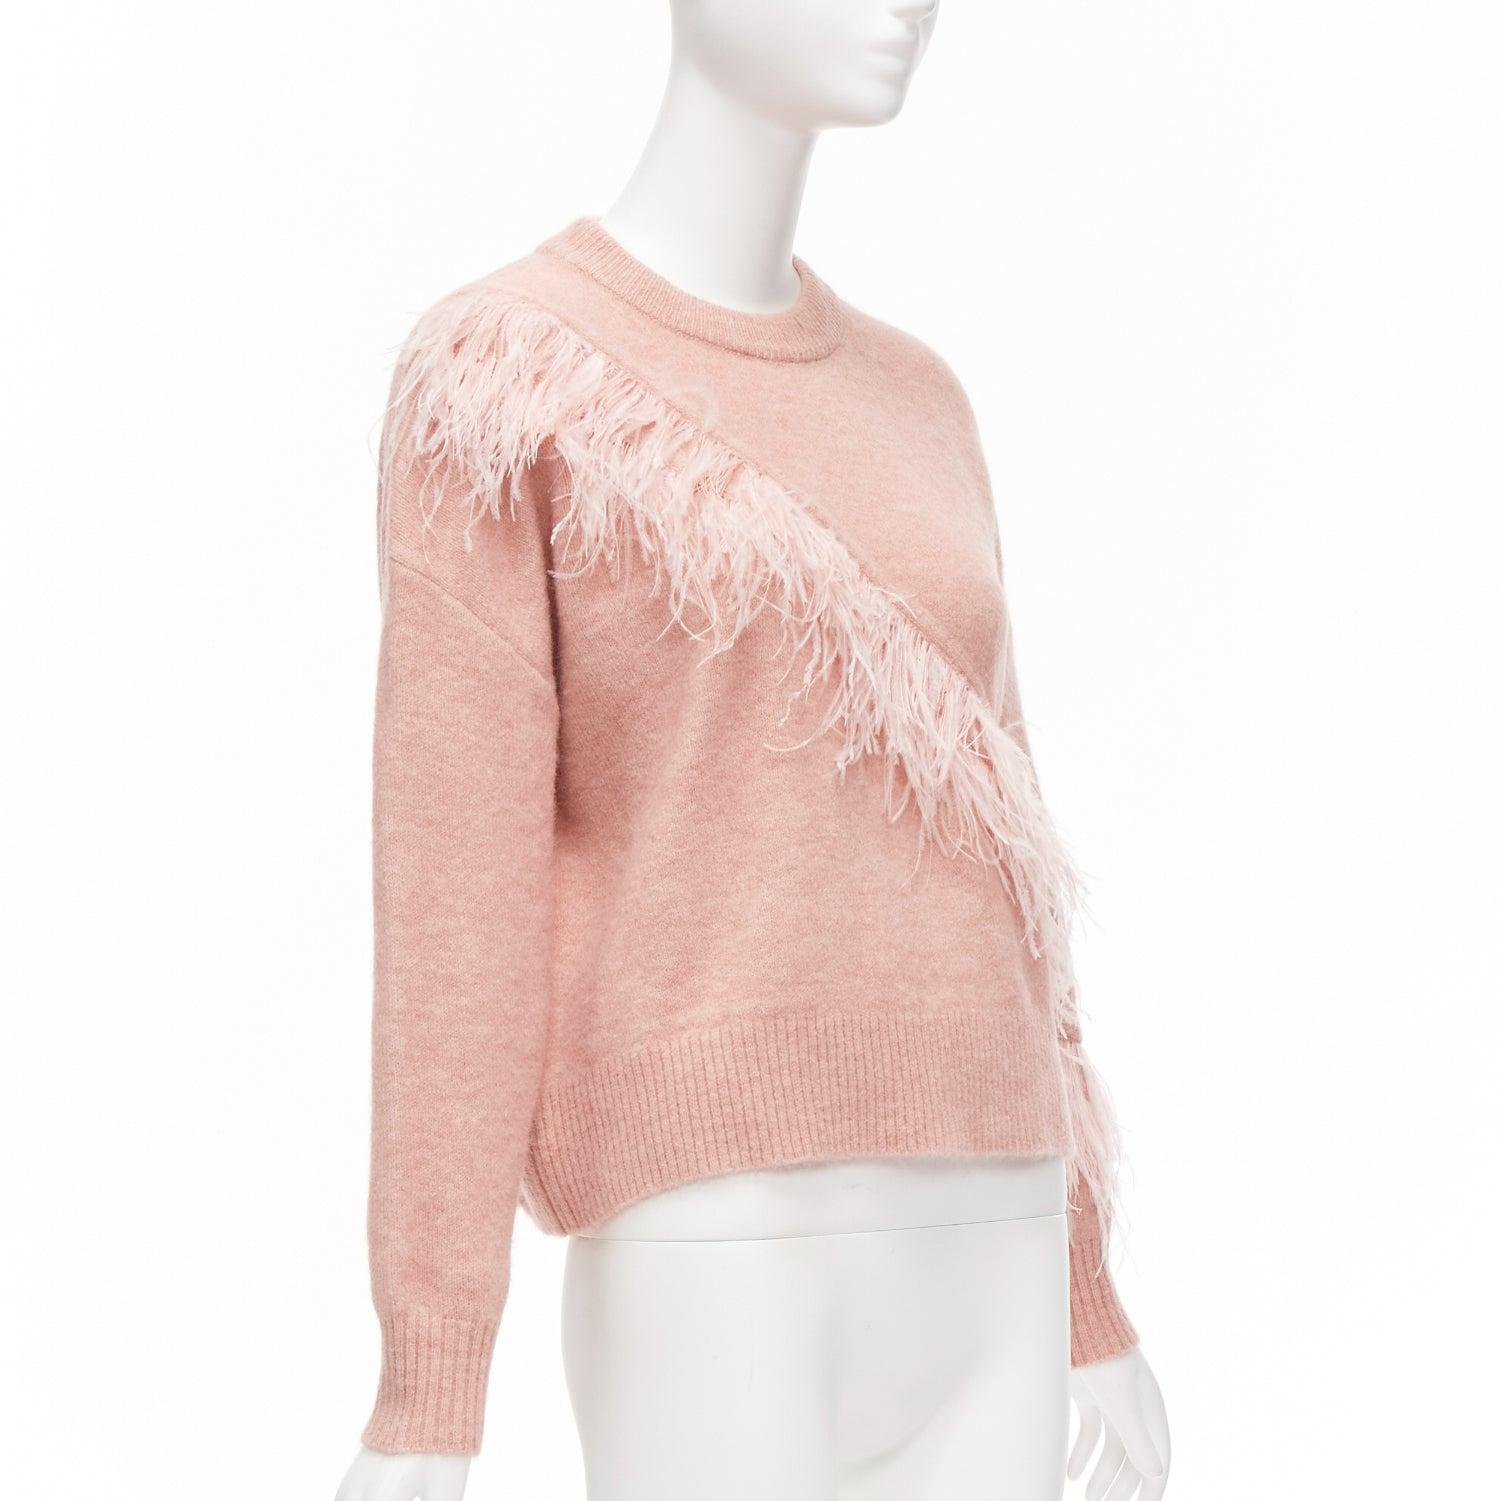 CINQ A SEPT Merritt blush pink feather trimmed wool blend cropped sweater XS
Reference: AAWC/A00659
Brand: Cinq a Sept
Material: Wool, Feather
Color: Pink
Pattern: Solid
Extra Details: Feathered trim slashes through this sweater on the diagonal,